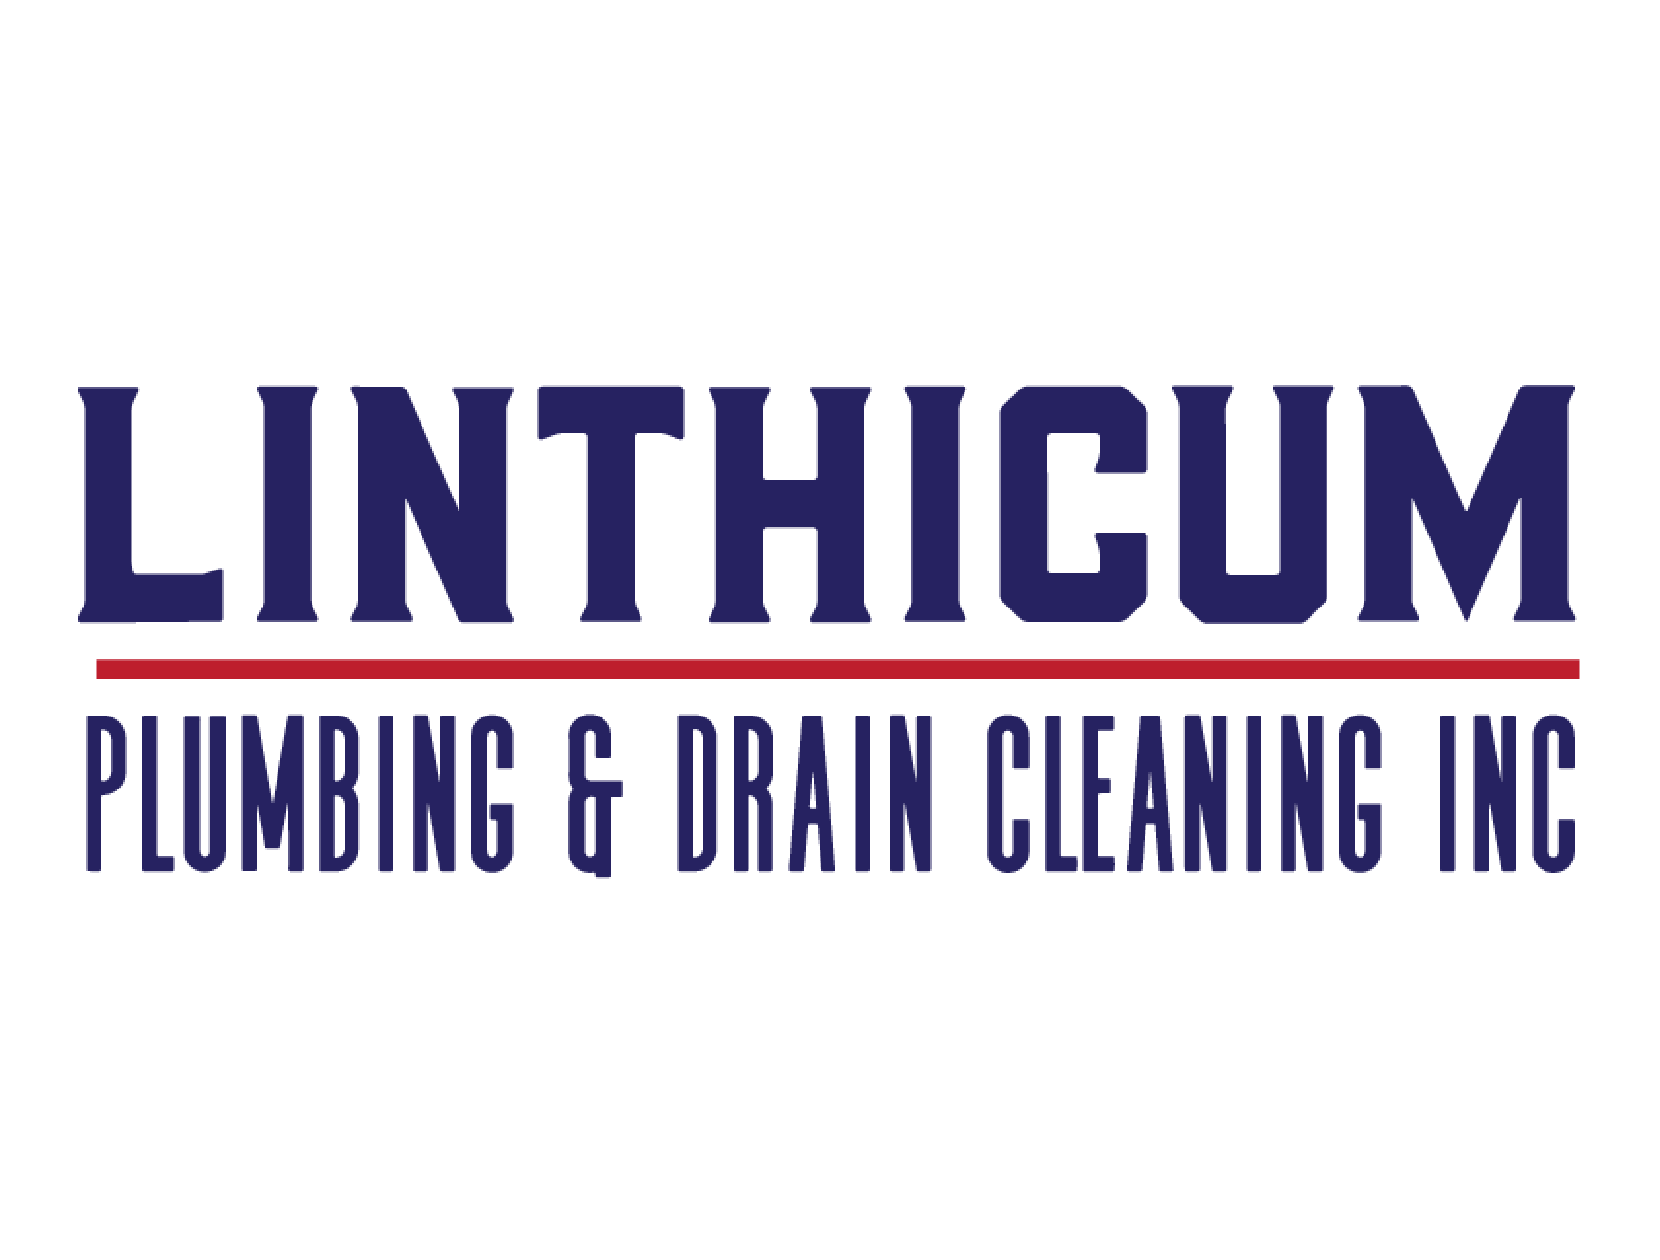 Linthicum Plumbing (1).png